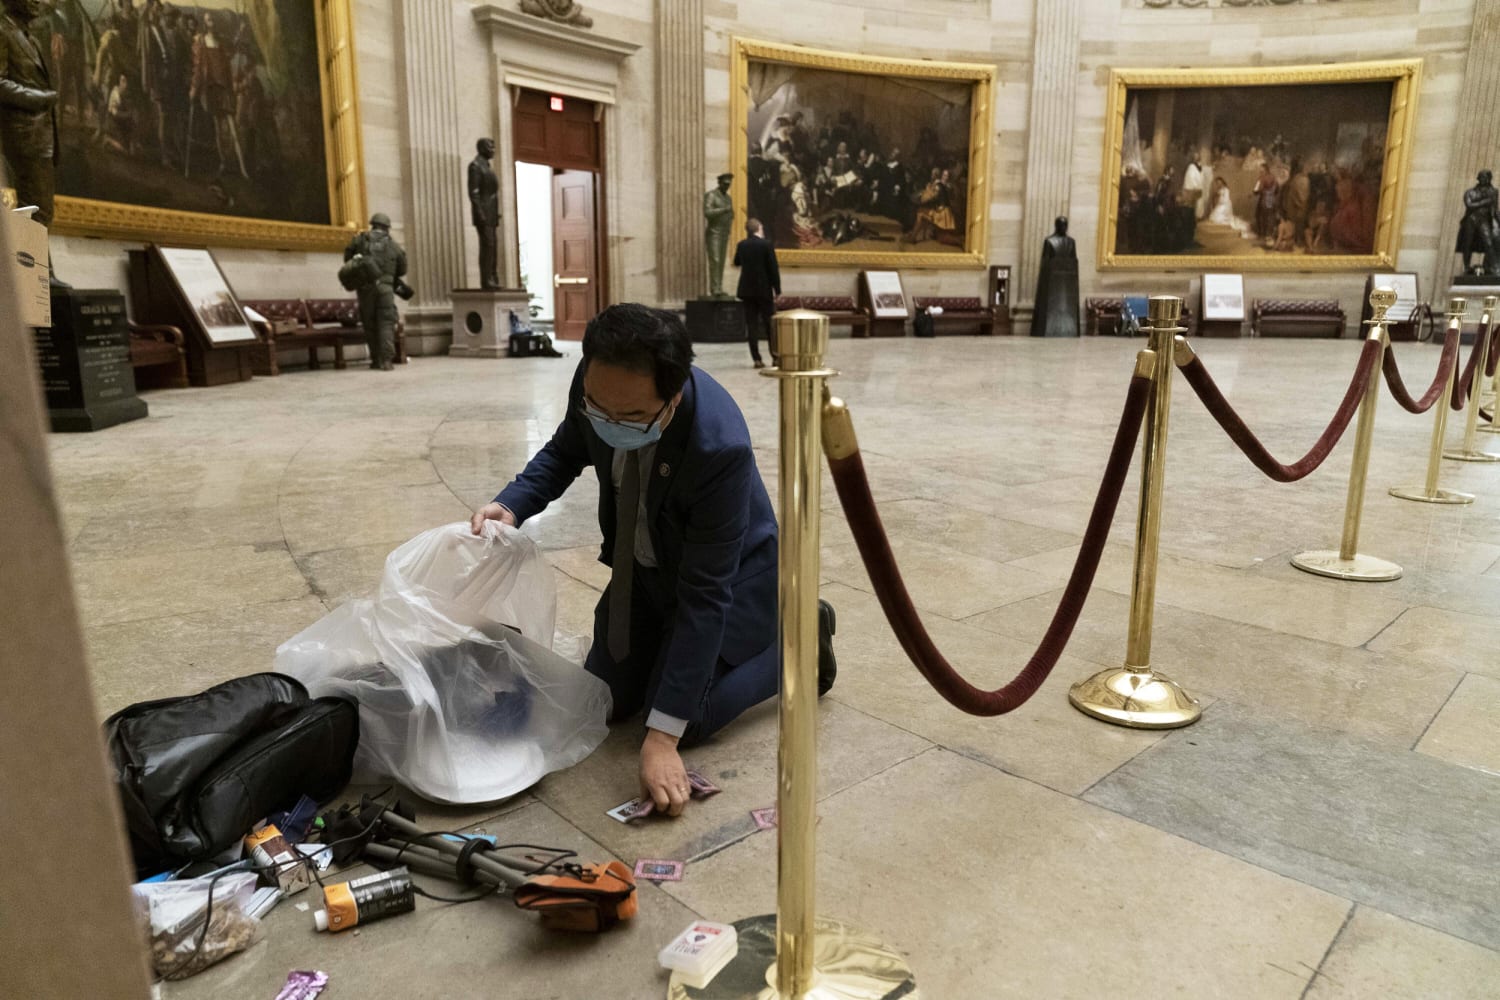 A ‘simple’ gesture: Congressman reflects on photo that went viral in wake of Capitol riot